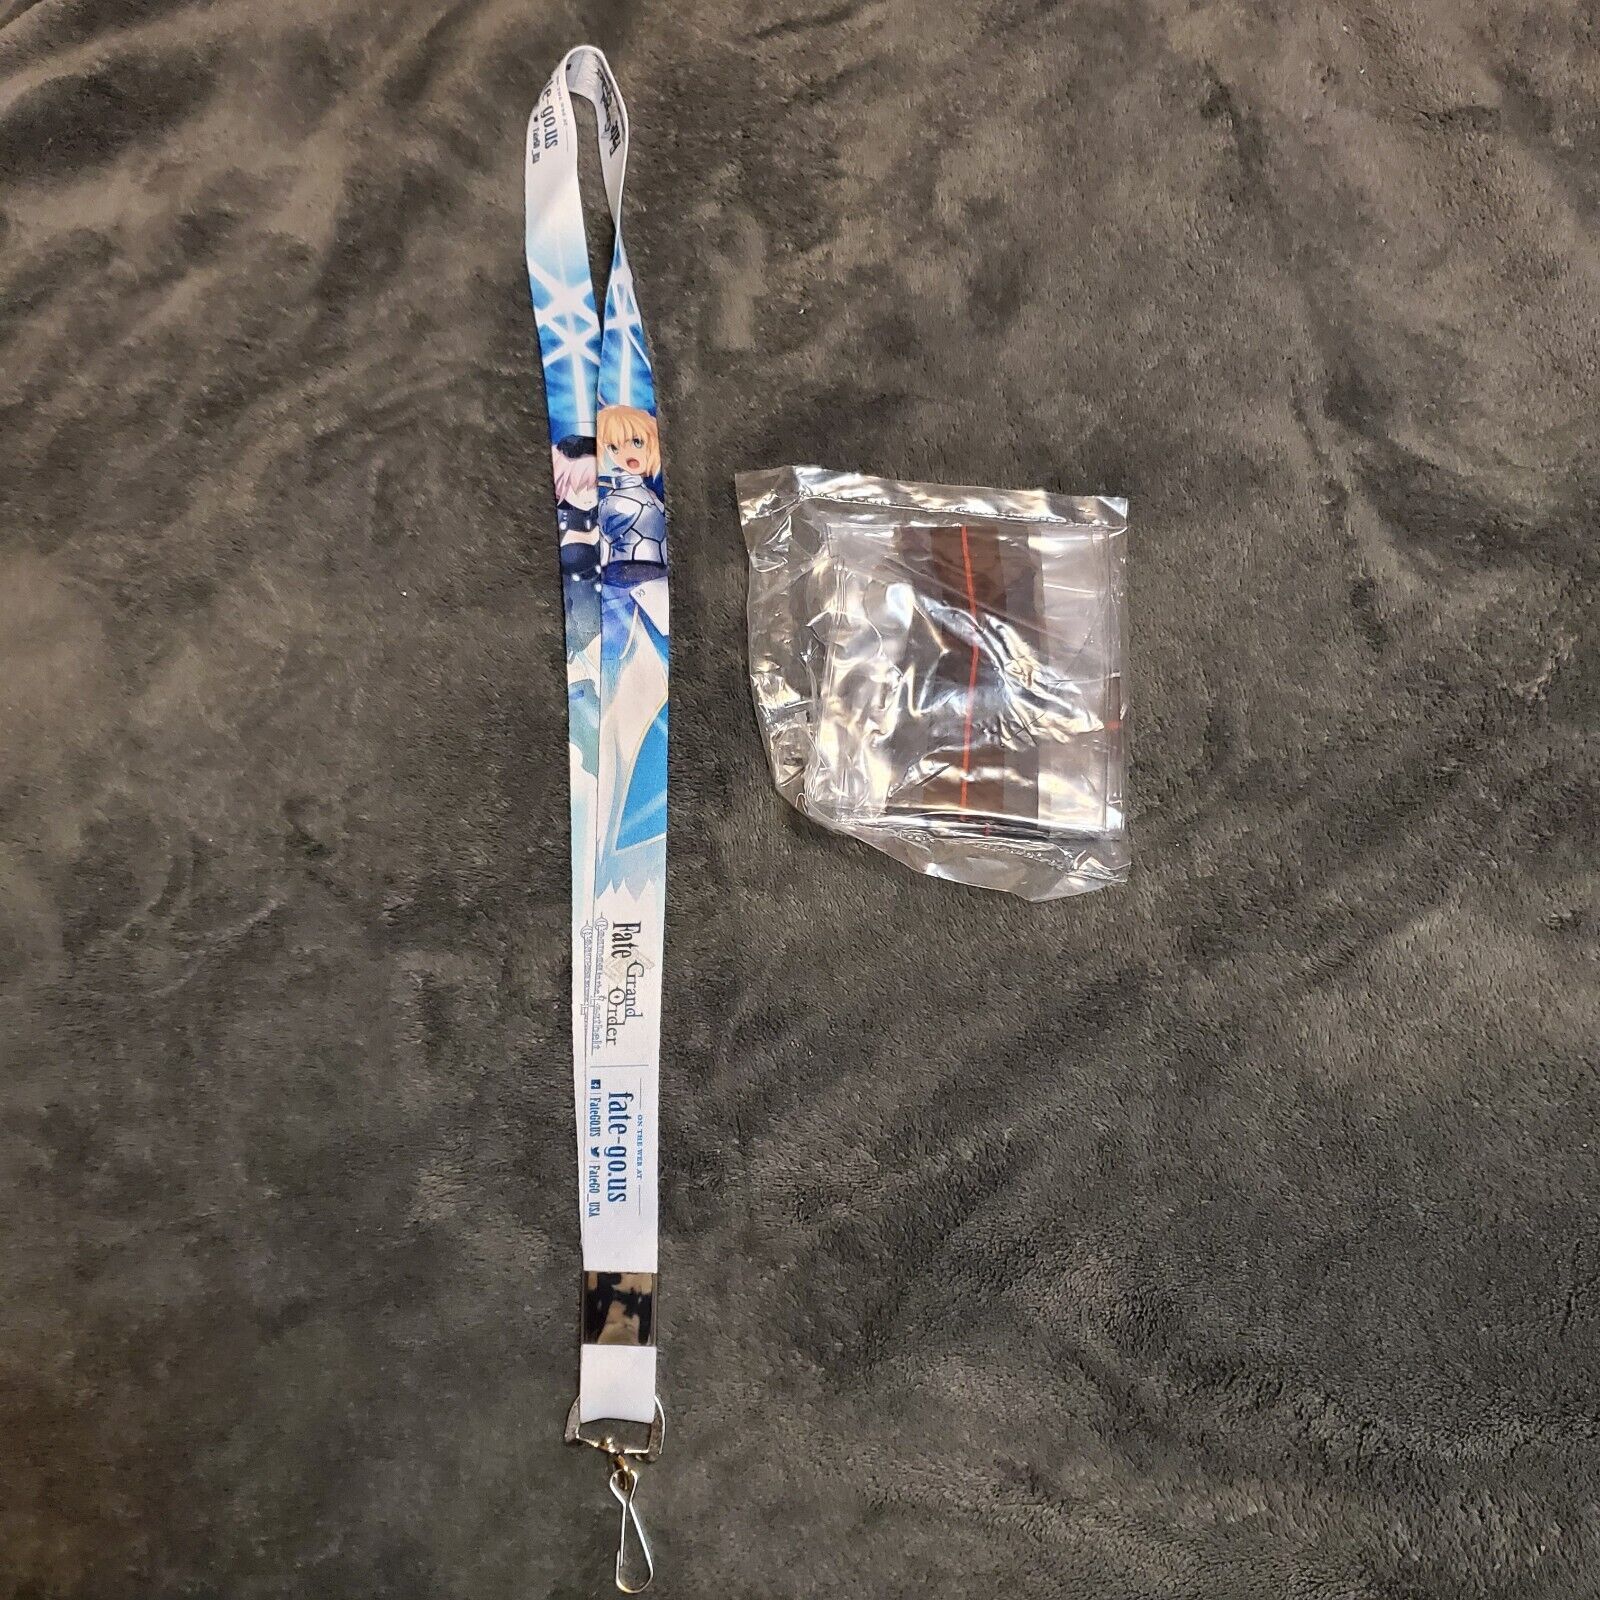 Official Fate Grand Order FGO Maid Alter Sword and lanyard Anime NYC 2022